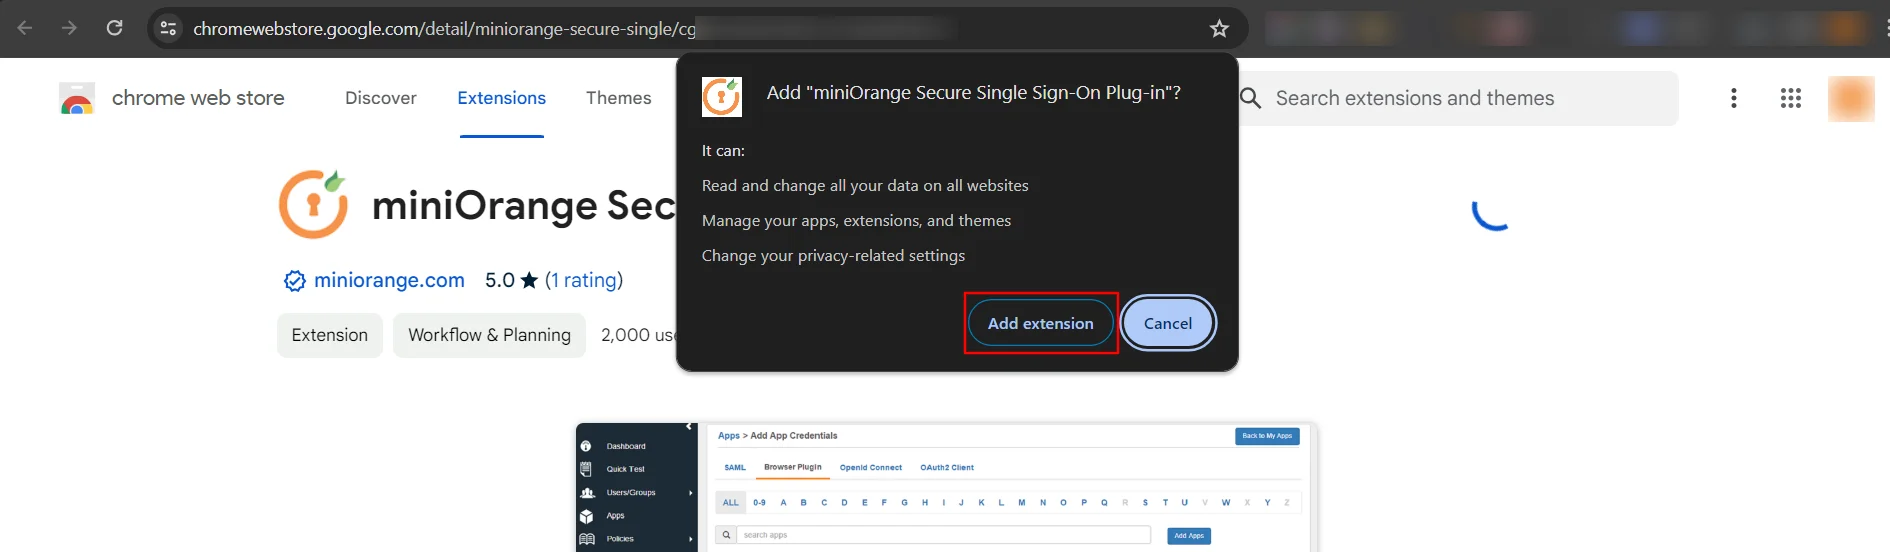 24 Seven Office Single Sign-On (sso) extension added in chrome